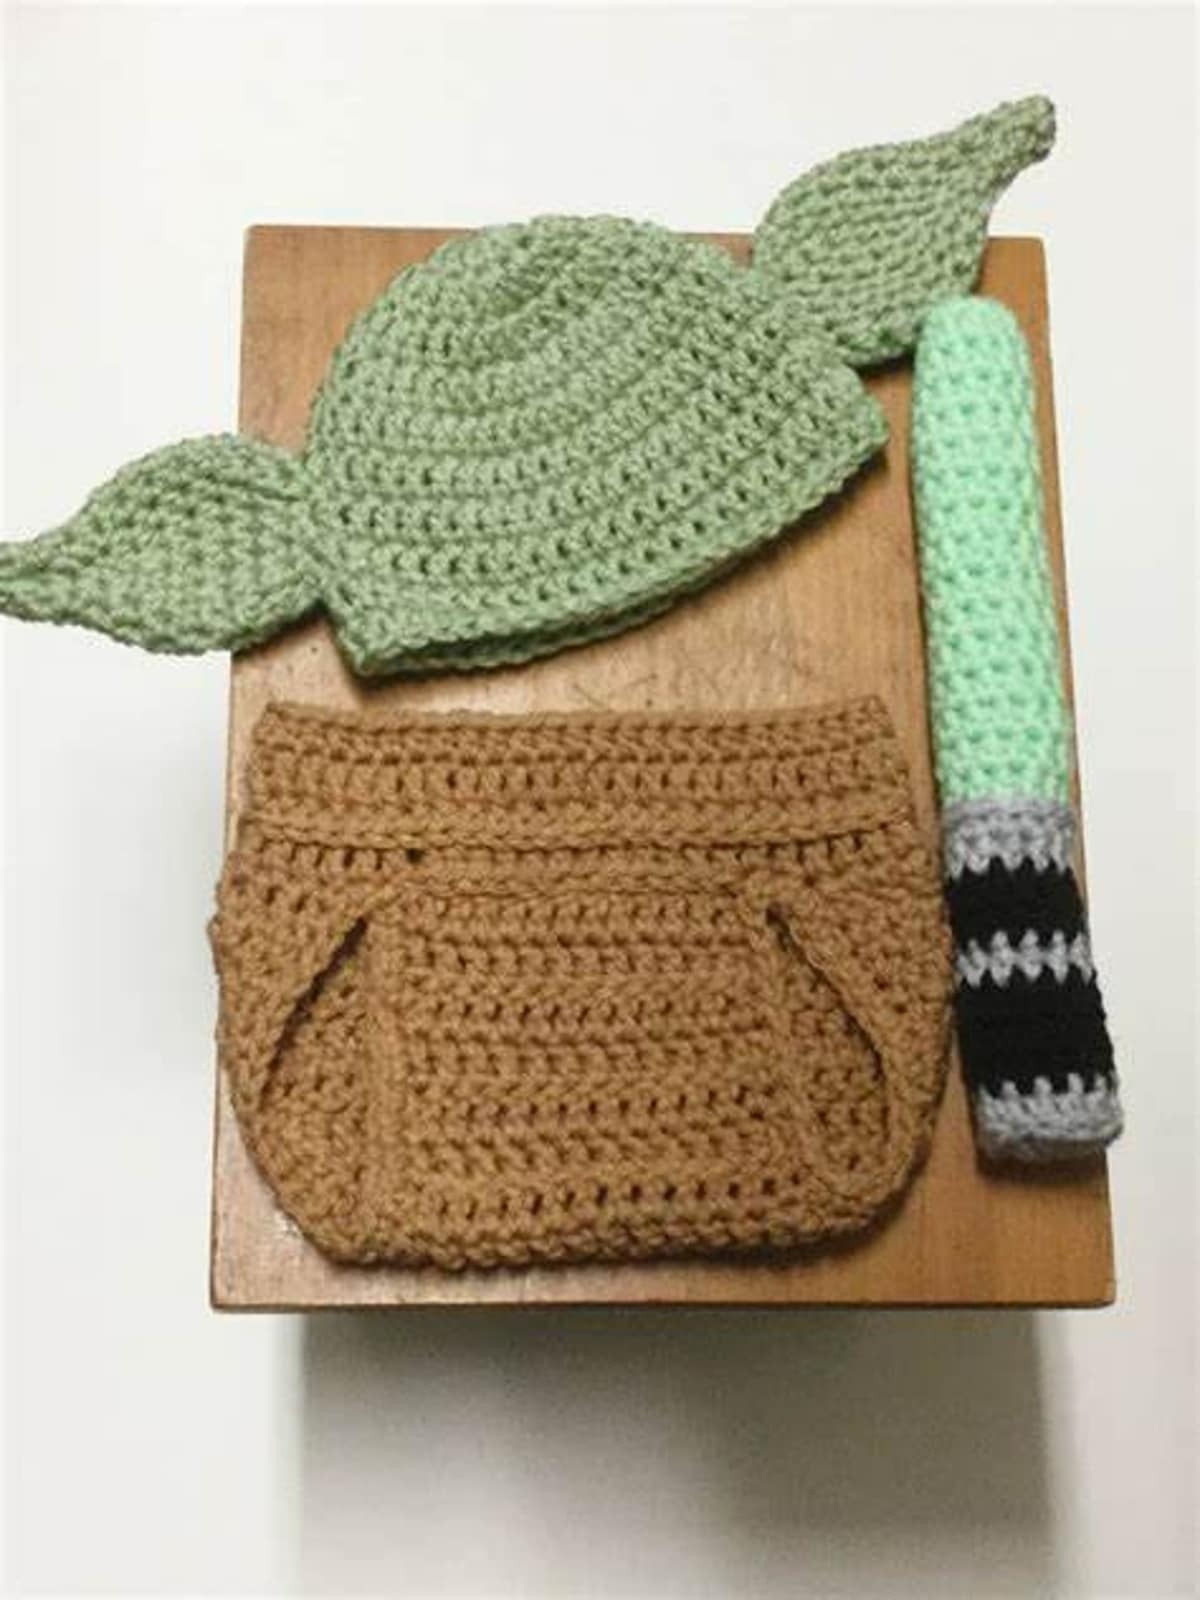 Newborn crochet baby Yoda costume with a green hat, brown diaper cover, and green tail with gray and black stripes on the bottom.